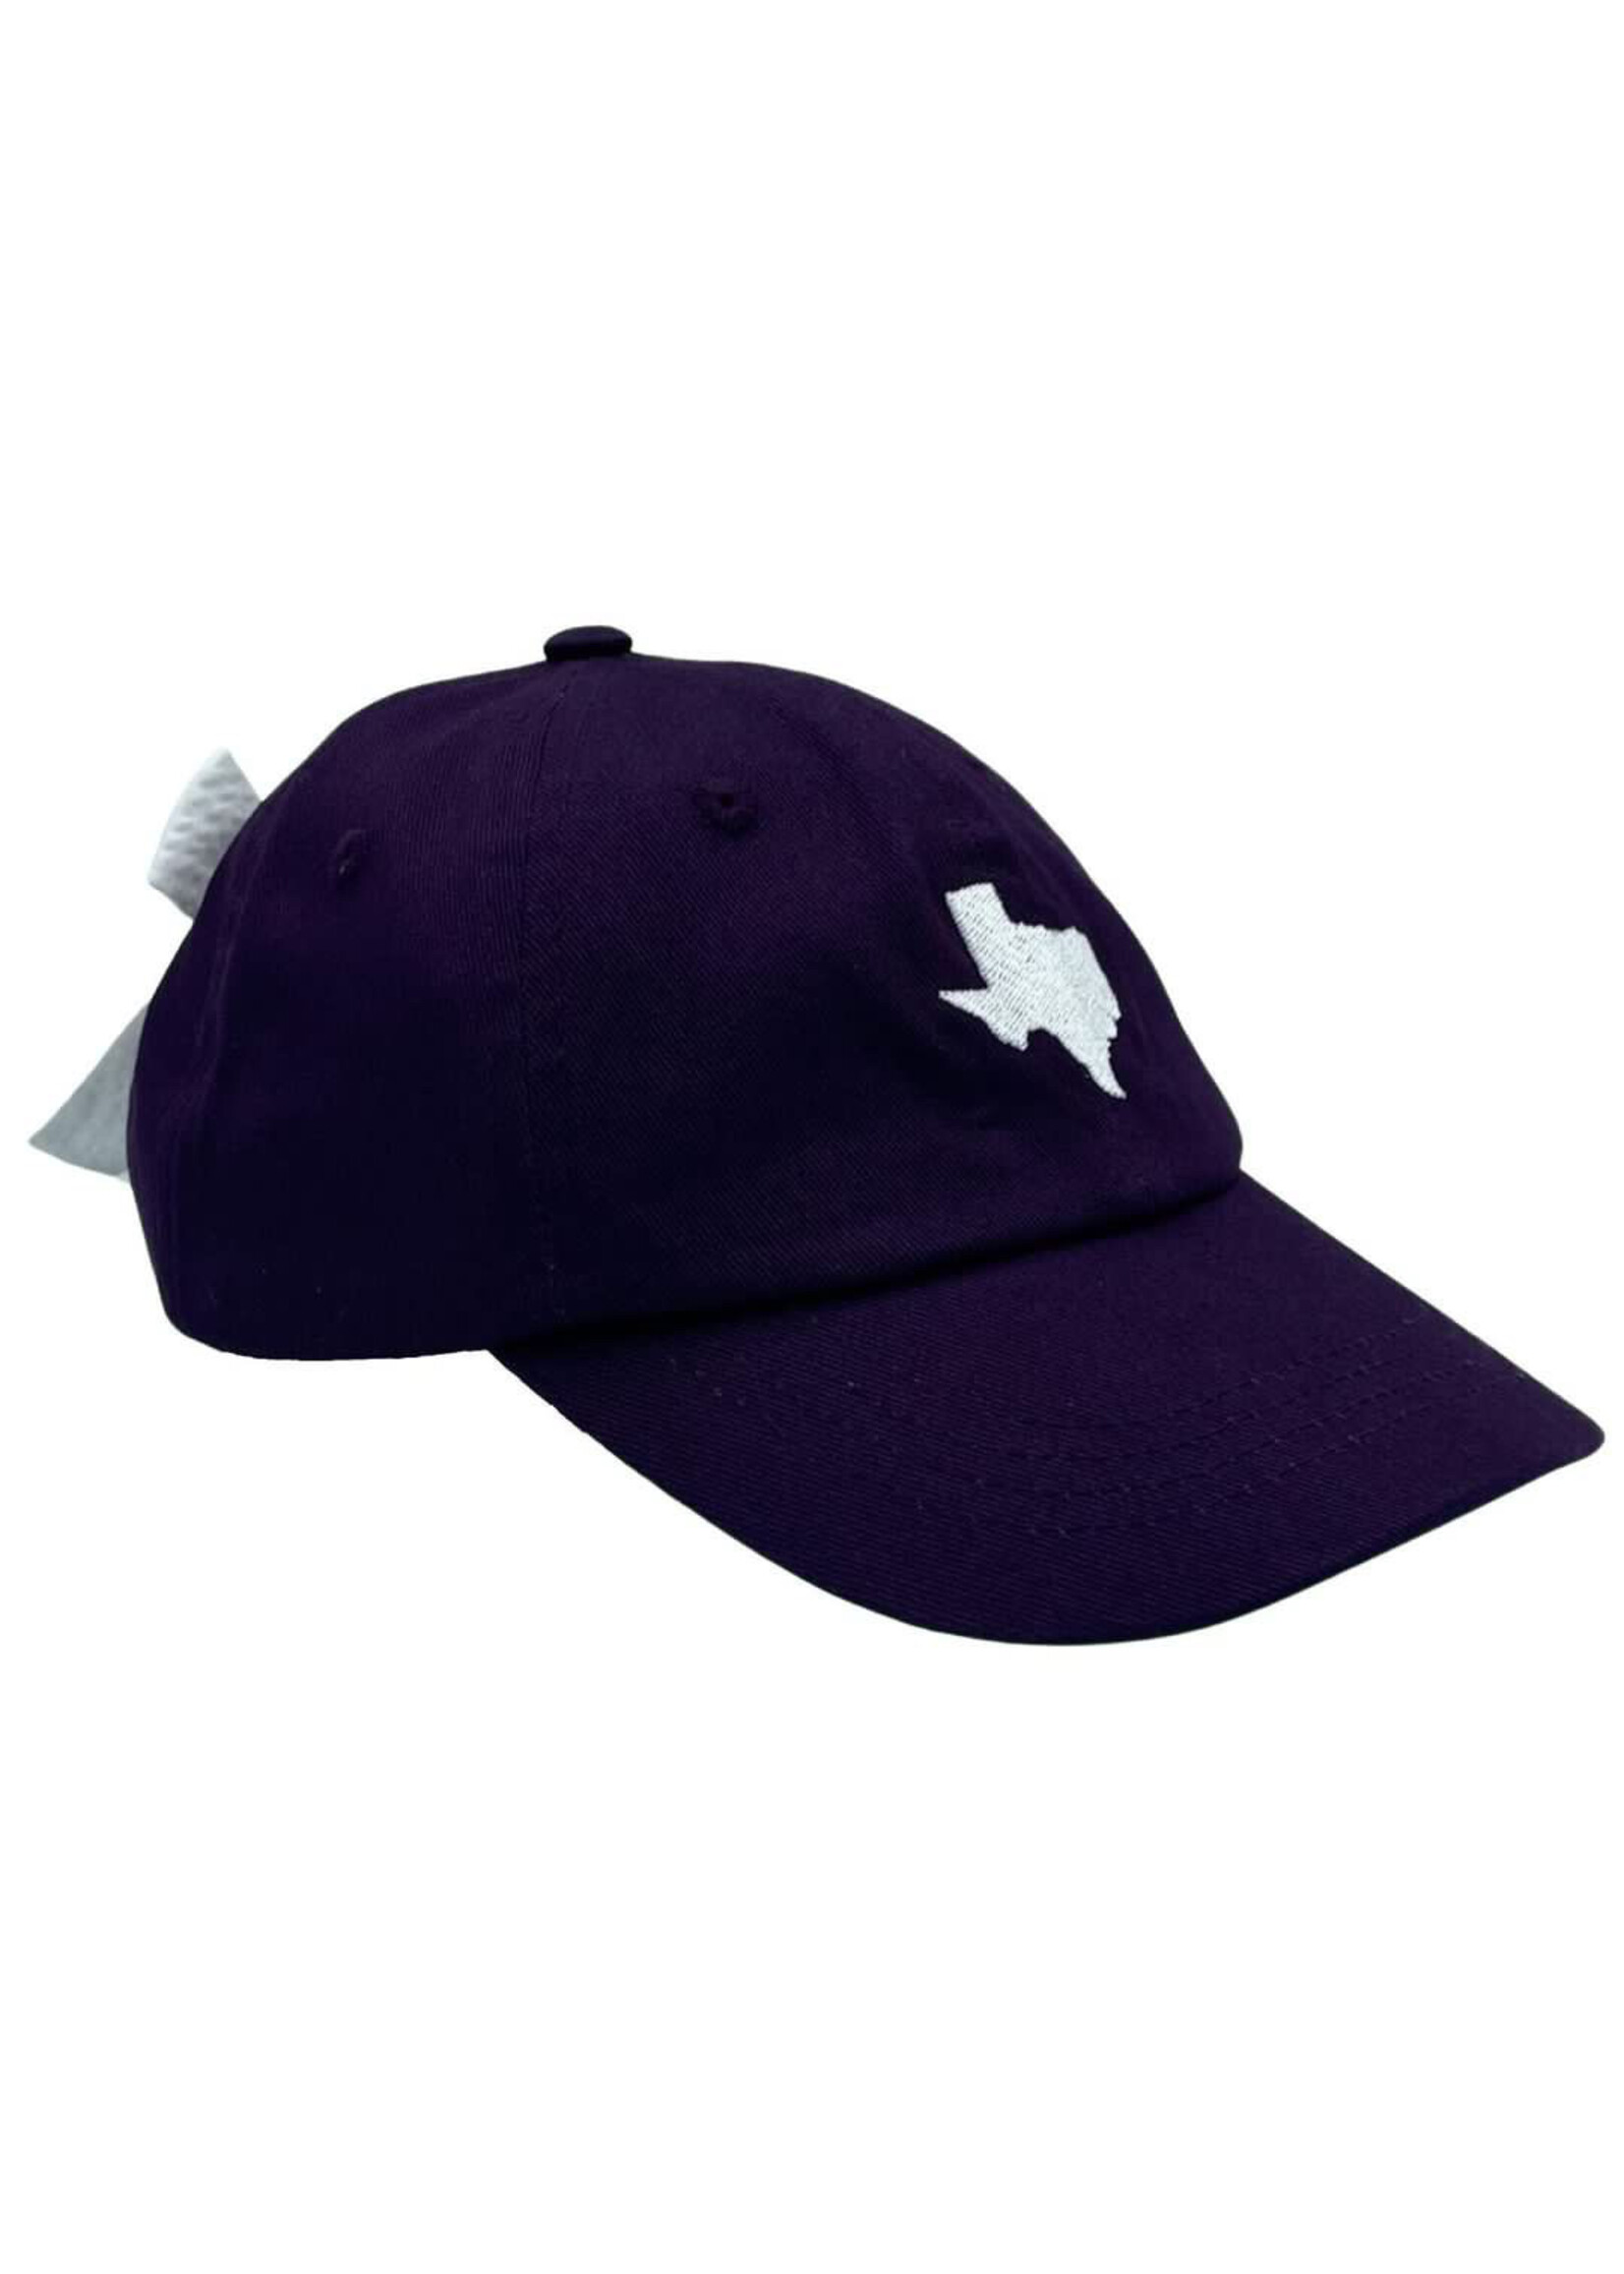 Bits & Bows Bits & Bows Girls Purple TX Hat -Purple with Bow